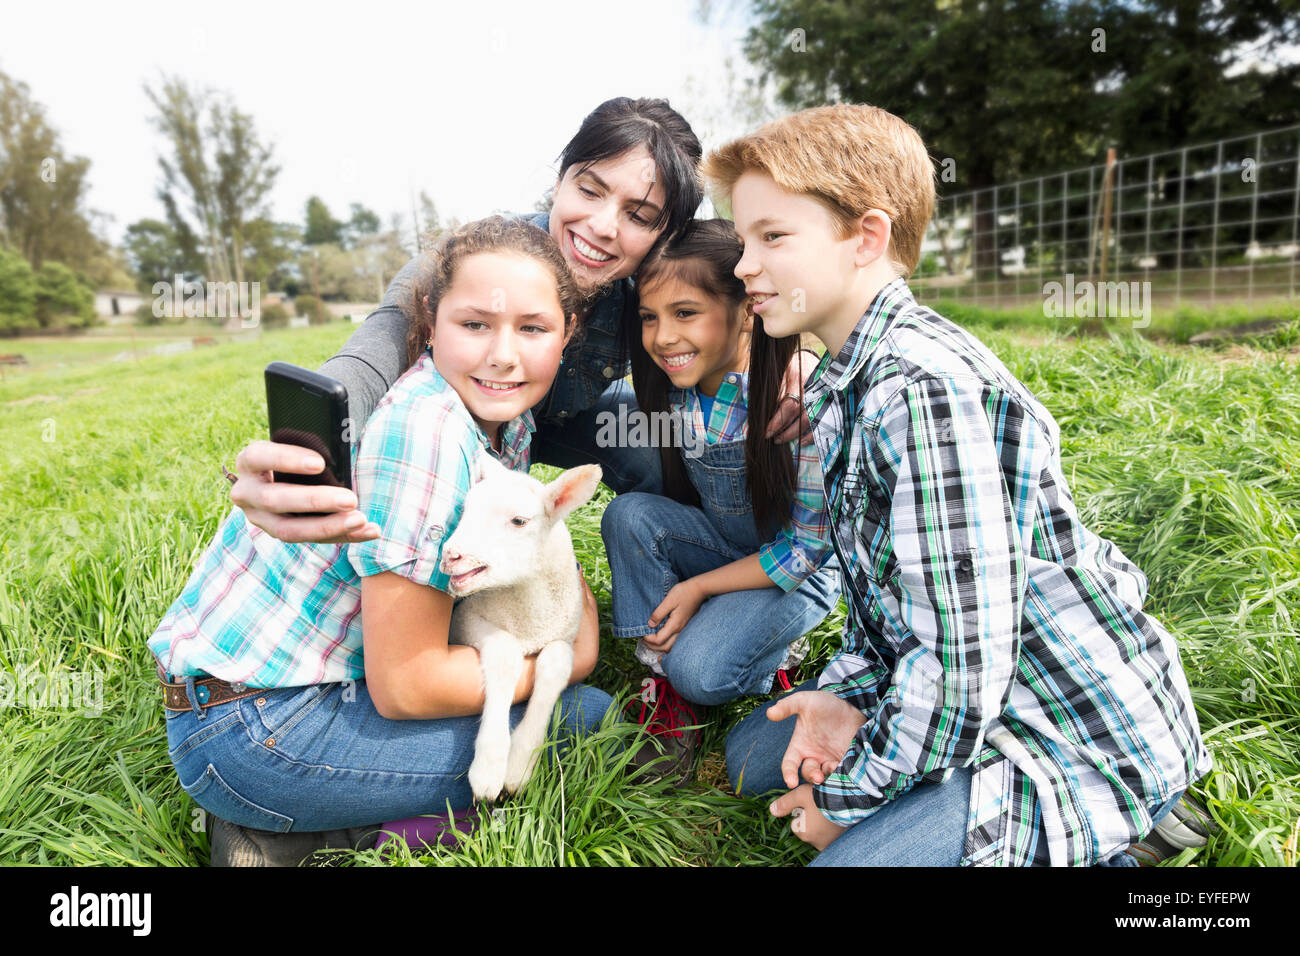 Woman with girls(6-7, 12-13) and boy (10-11) photographing with lamb Stock Photo